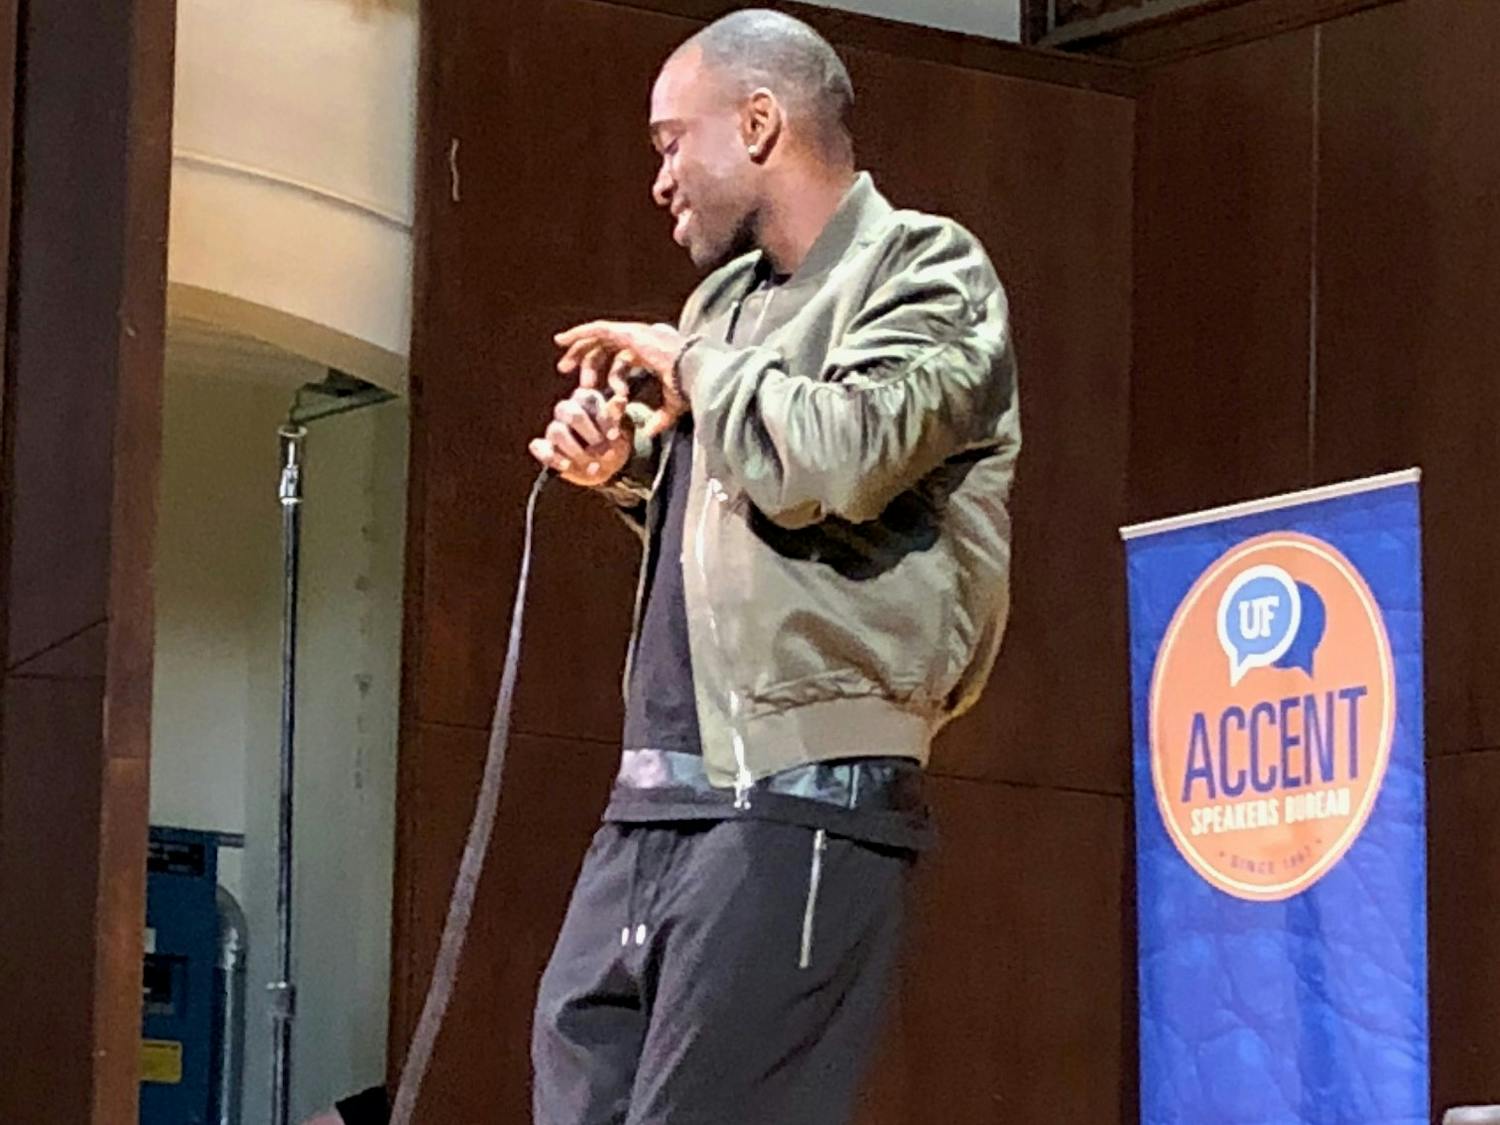 Jay Pharoah performed an hour-long comedy act for 850 attendees at University Auditorium on Tuesday.